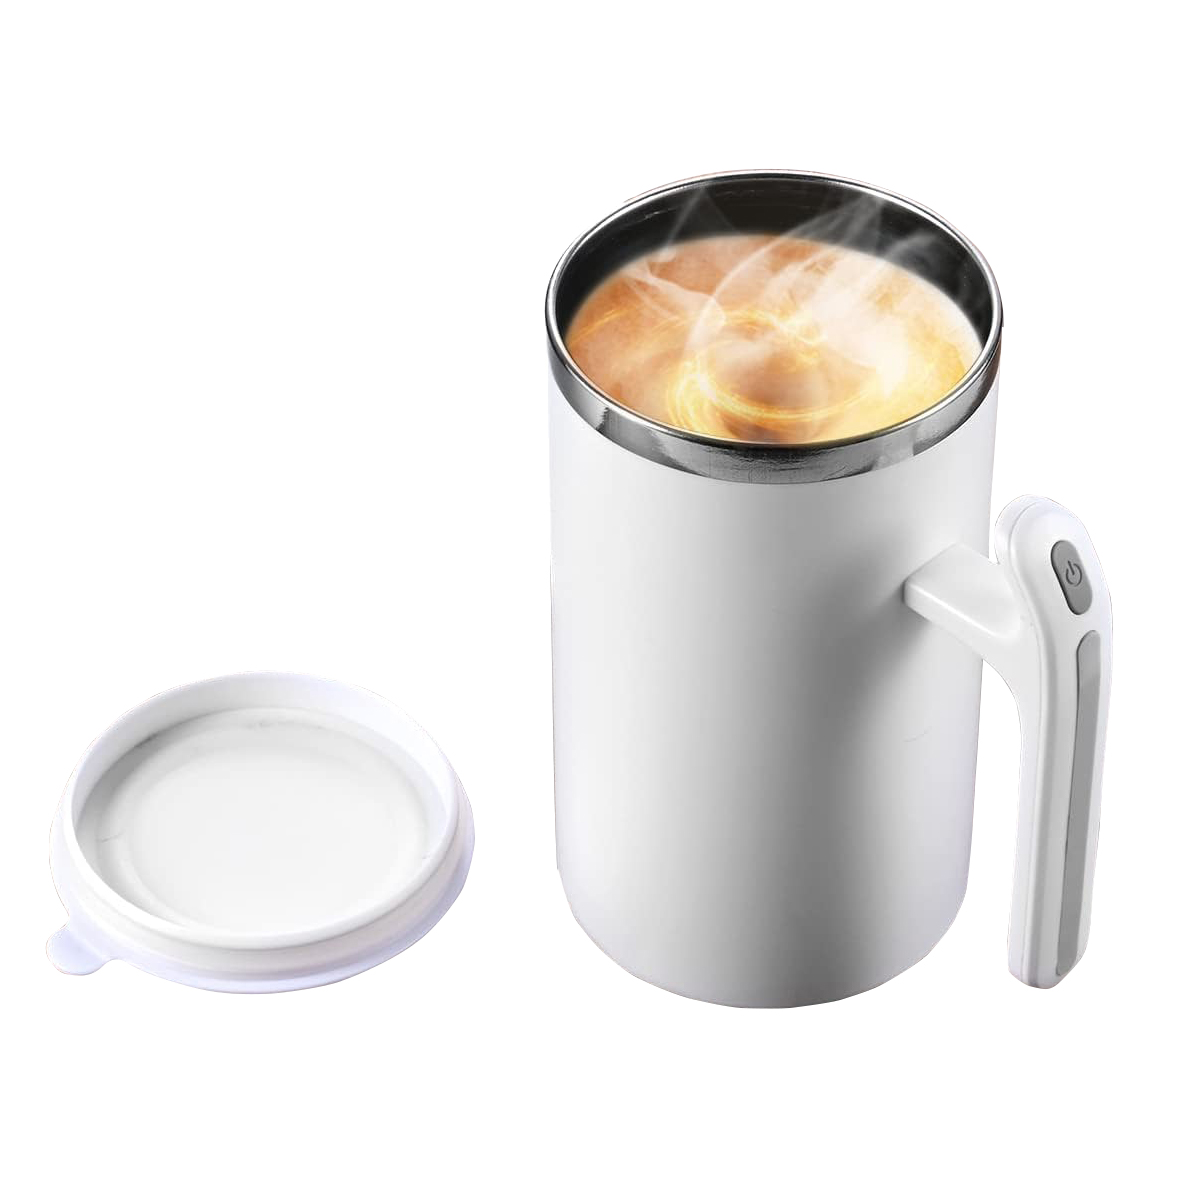 Auto mixing cup